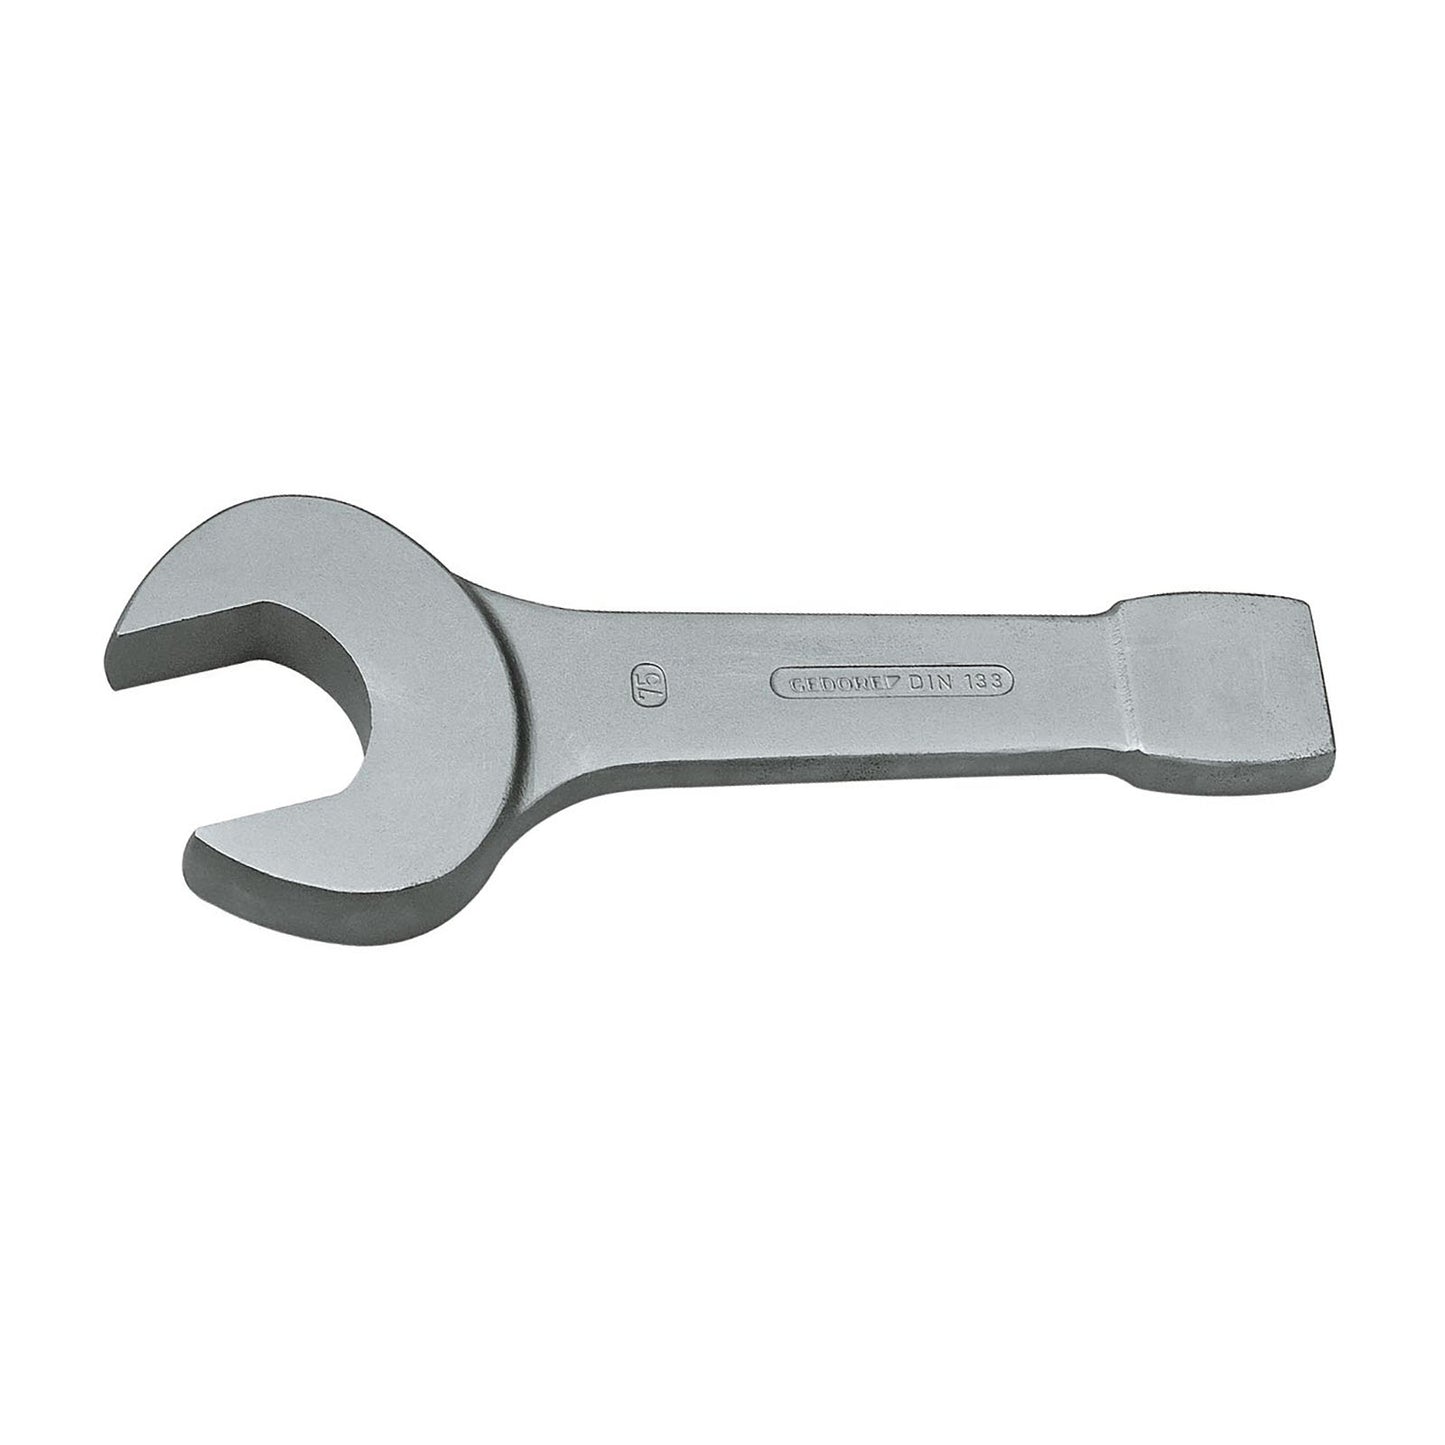 GEDORE 133 30 - Open Strike Wrench, 30mm (6400260)